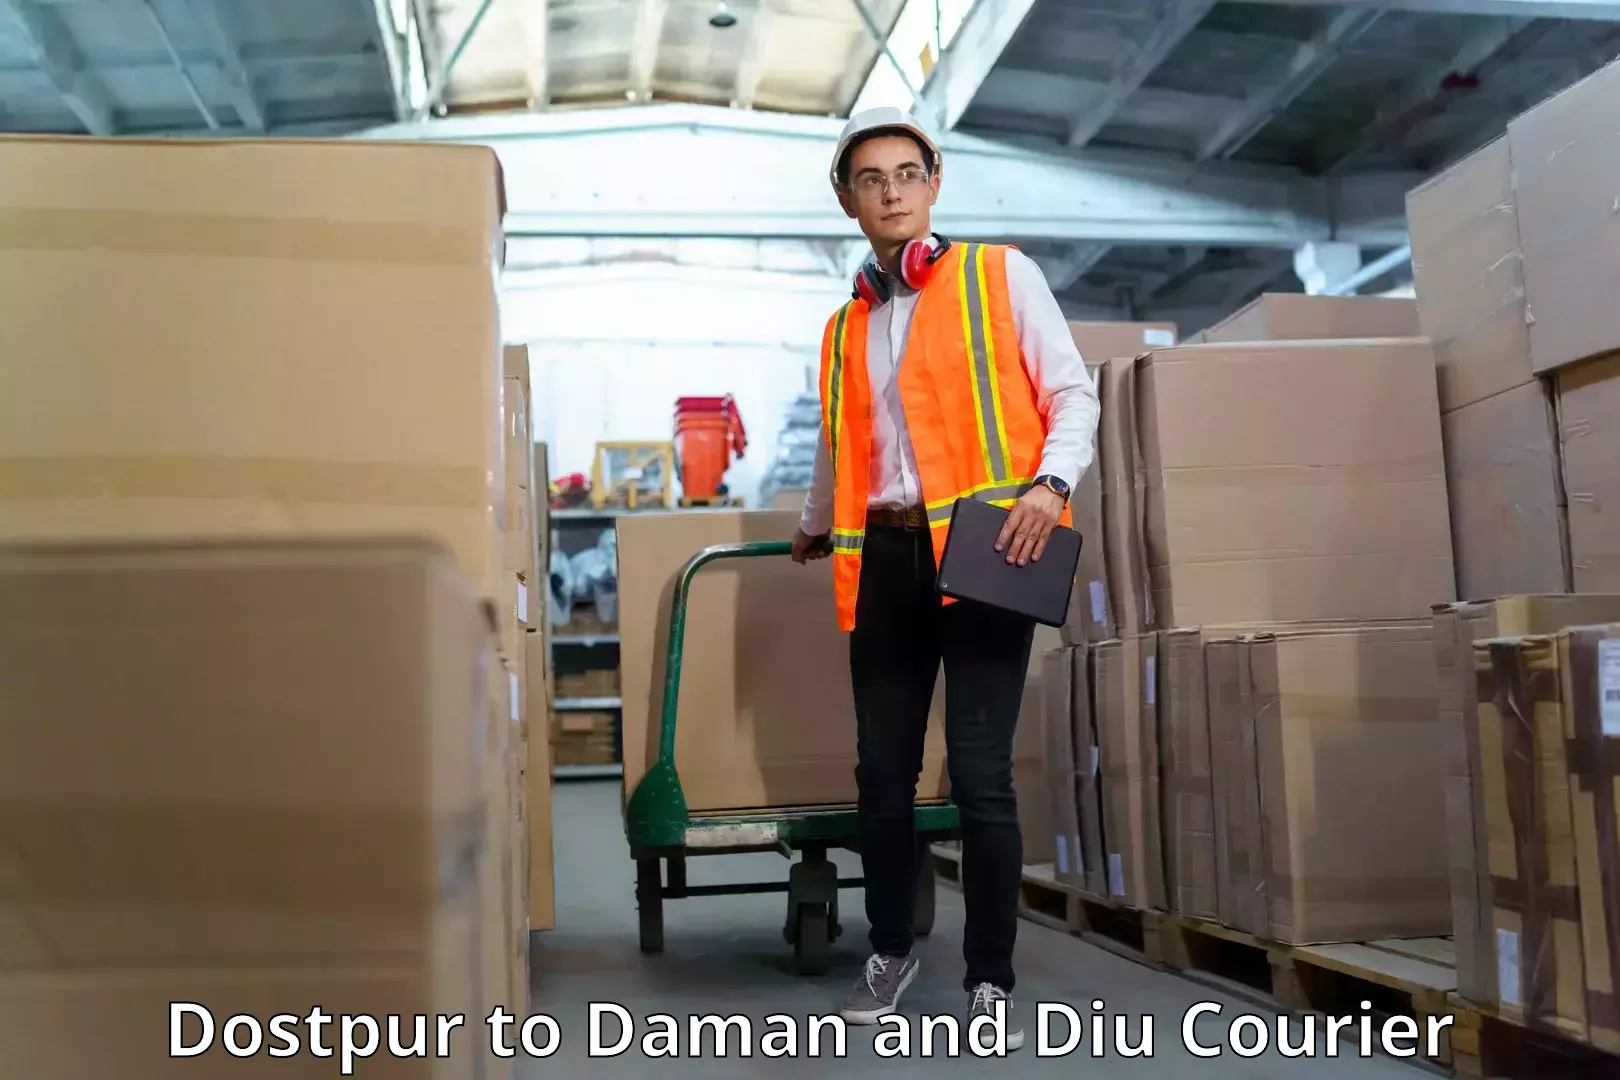 Multi-national courier services Dostpur to Daman